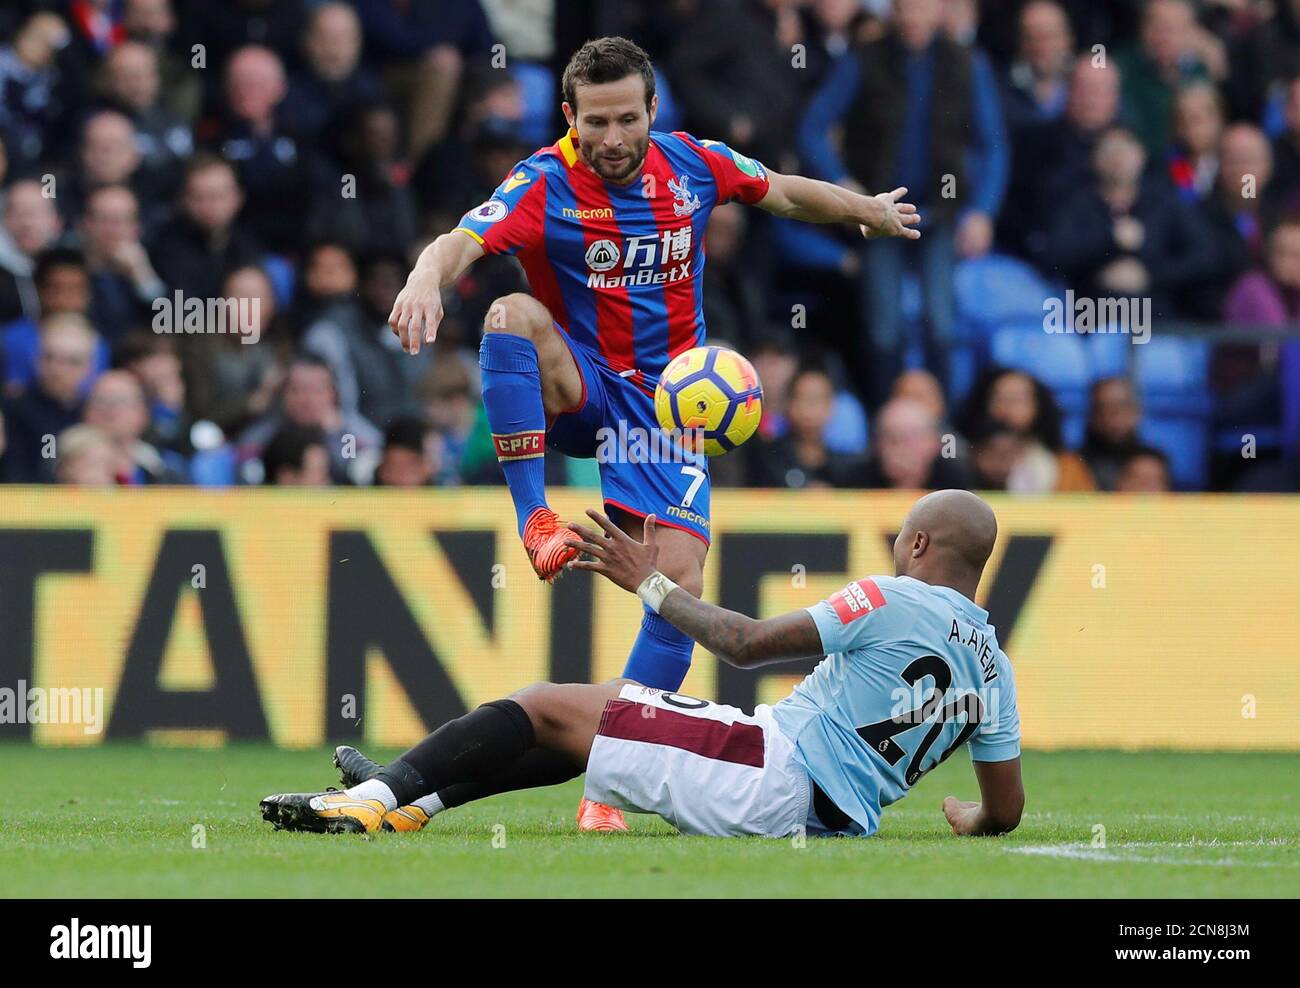 Soccer Football - Premier League - Crystal Palace vs West Ham United - Selhurst Park, London, Britain - October 28, 2017   Crystal Palace's Yohan Cabaye in action with West Ham United's Andre Ayew    REUTERS/Eddie Keogh    EDITORIAL USE ONLY. No use with unauthorized audio, video, data, fixture lists, club/league logos or 'live' services. Online in-match use limited to 75 images, no video emulation. No use in betting, games or single club/league/player publications. Please contact your account representative for further details.? Stock Photo